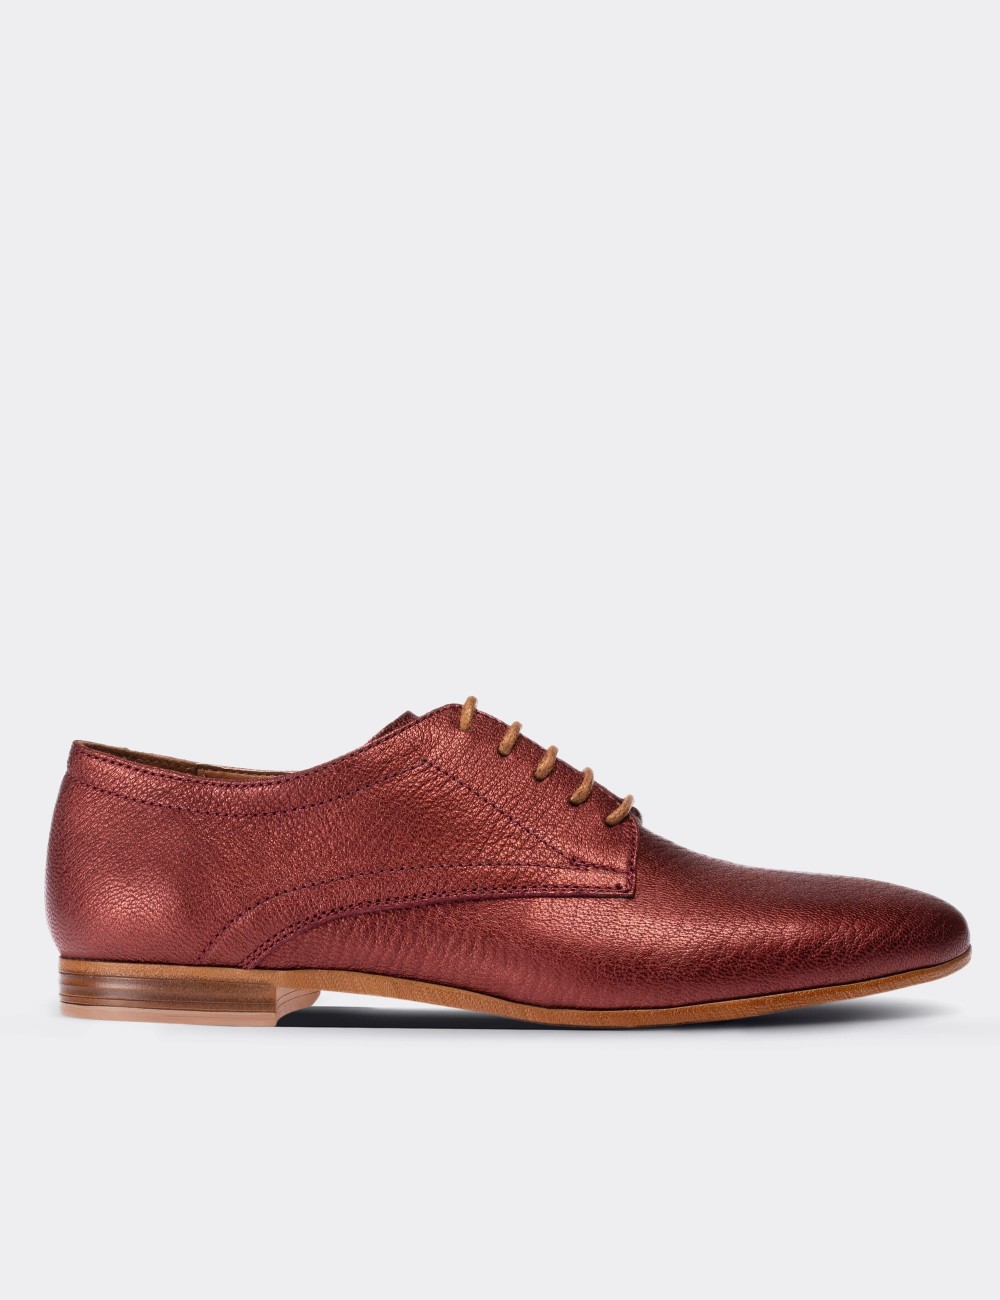 Burgundy  Leather Lace-up Shoes - 01430ZBRDC01